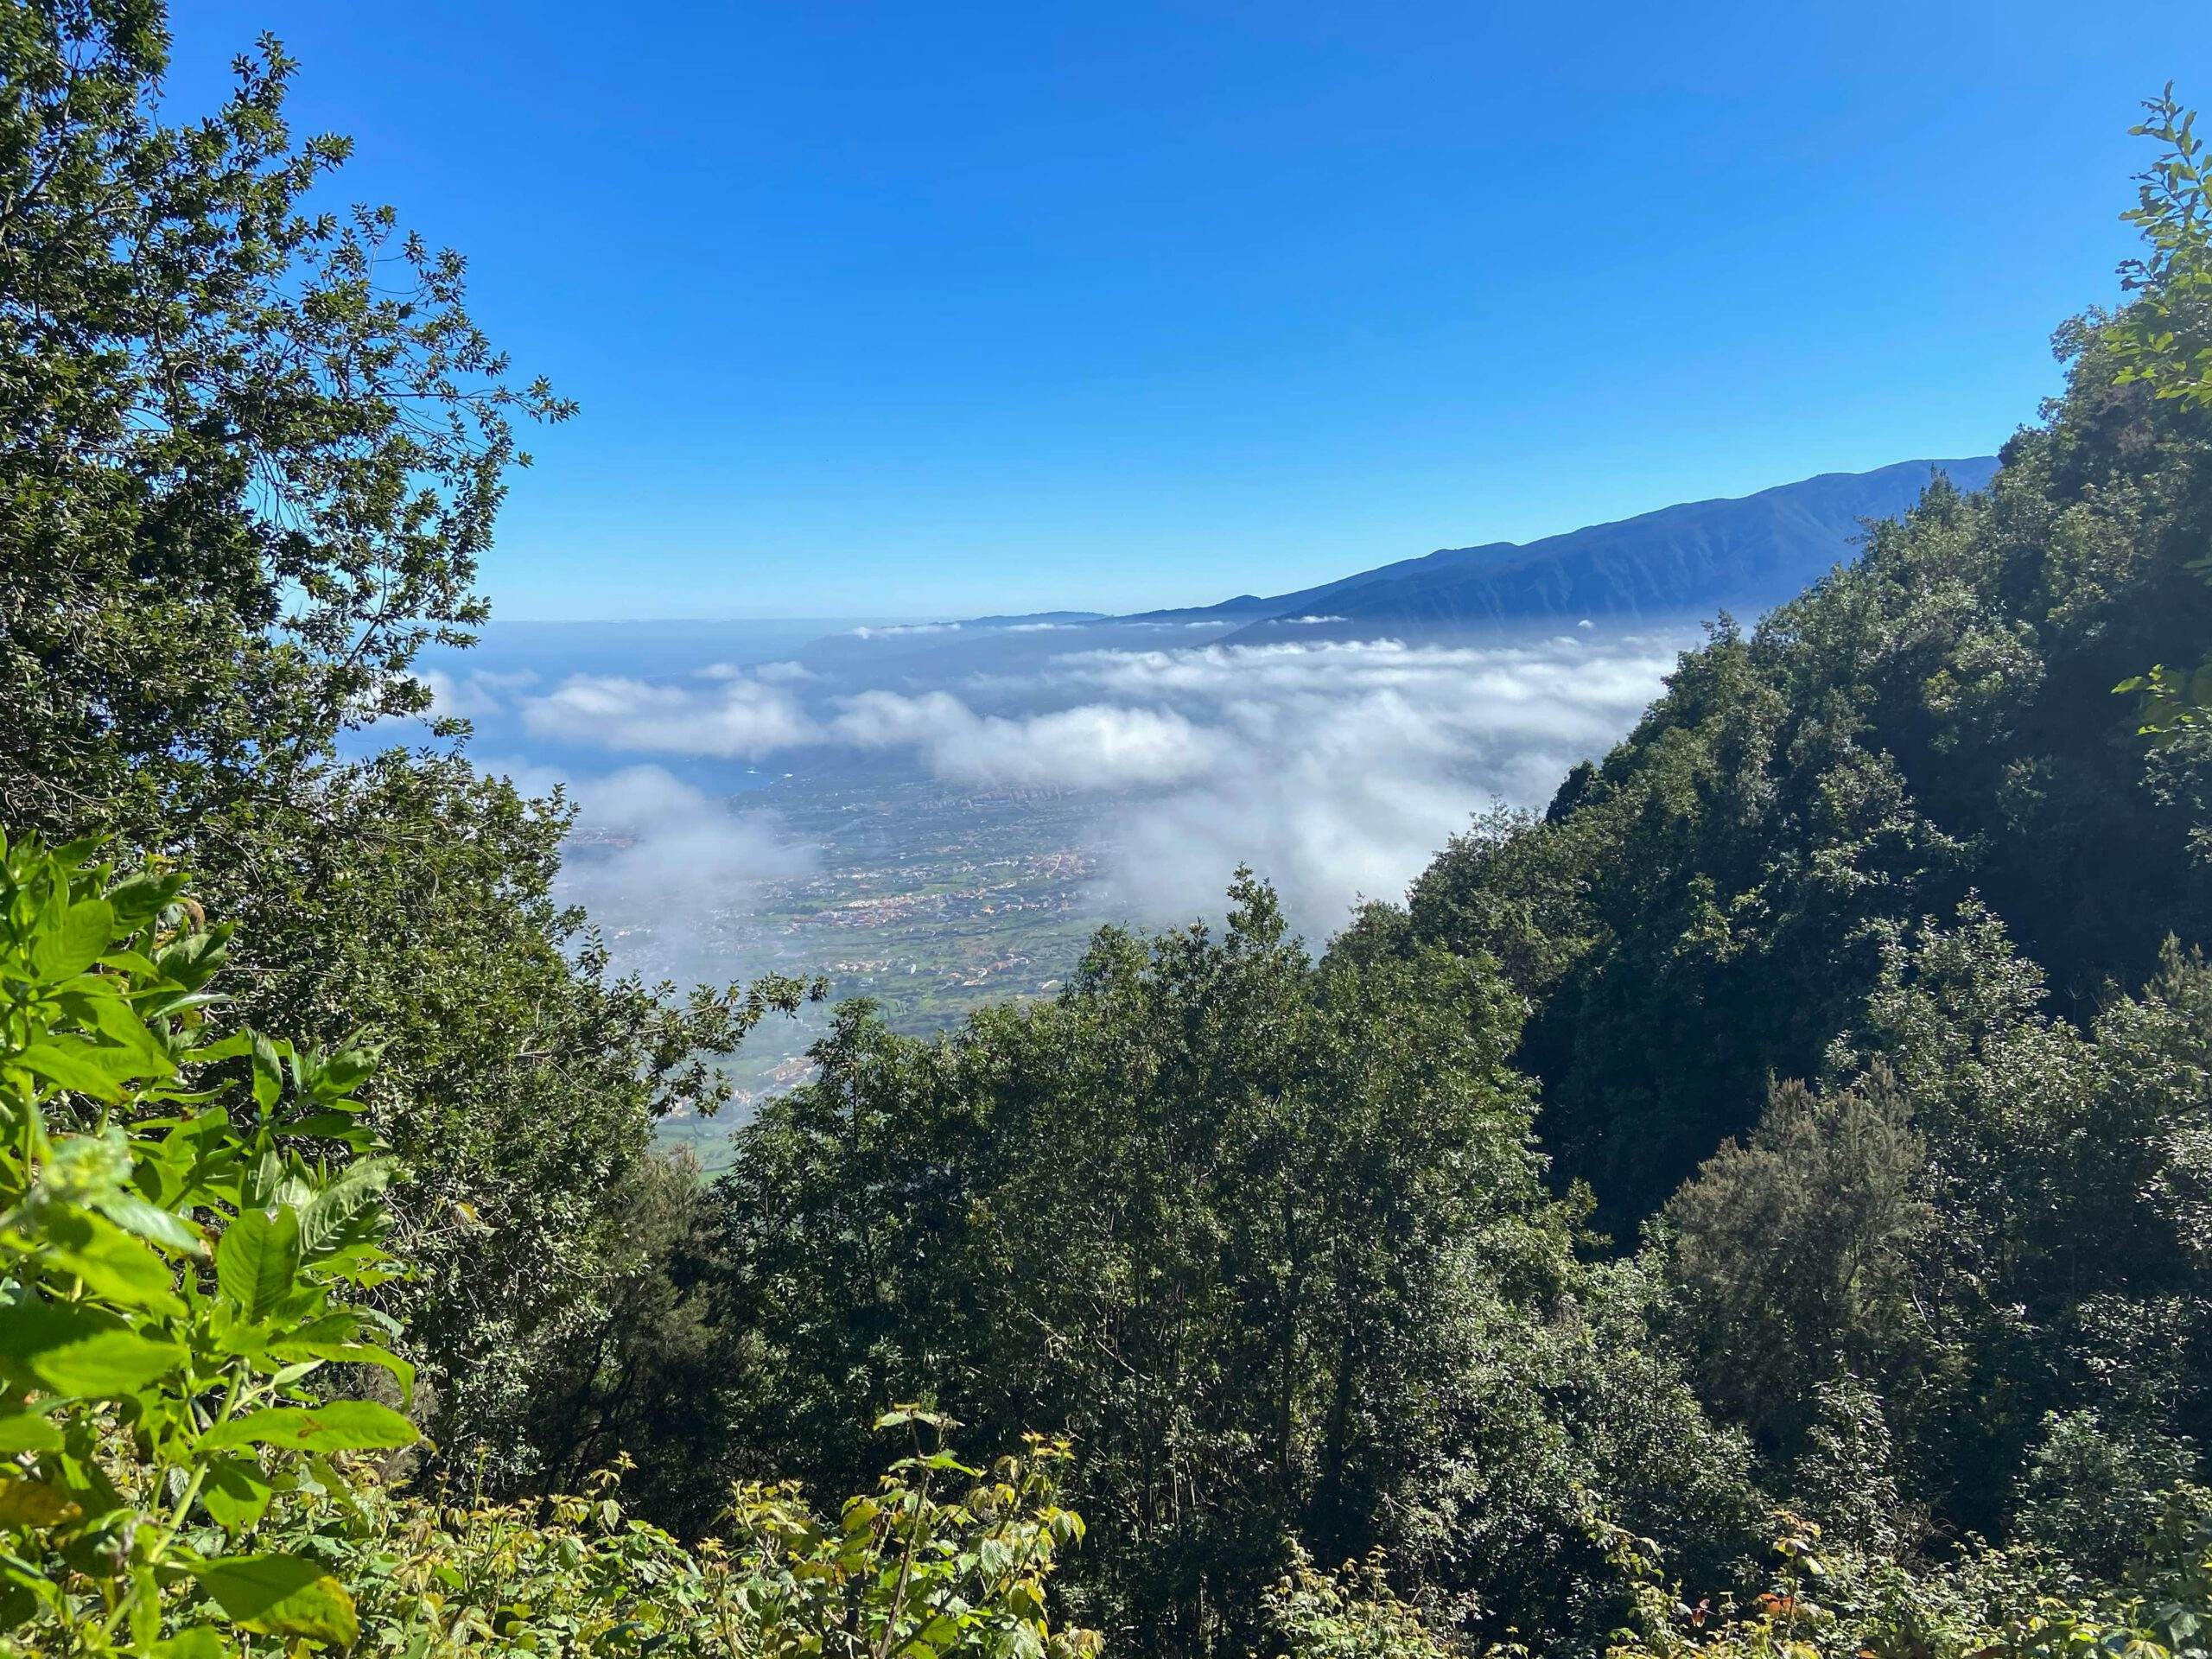 Clouds over the valley, but still a great view - on the way to Chanajiga